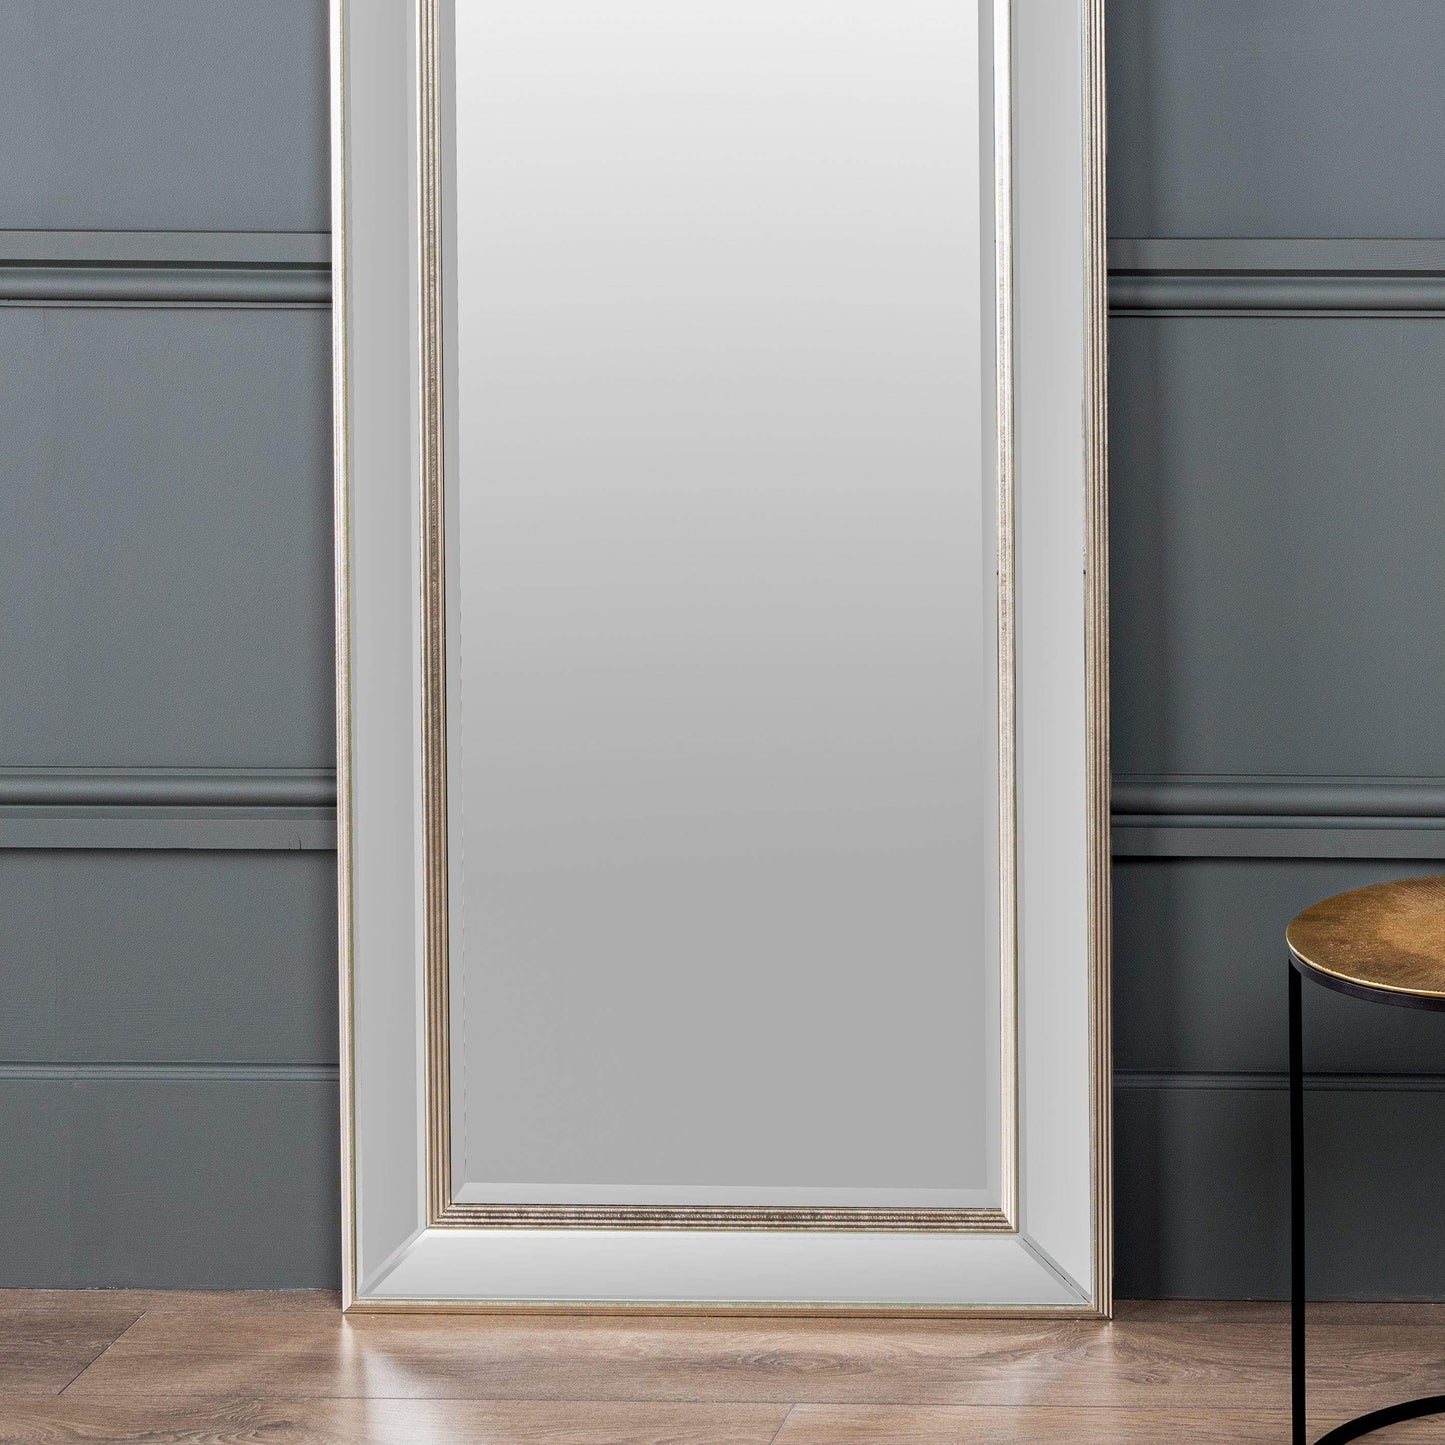 Mirrors  -  Gallery Farrell Champagne Leaner Mirror - 329883  -  50152138